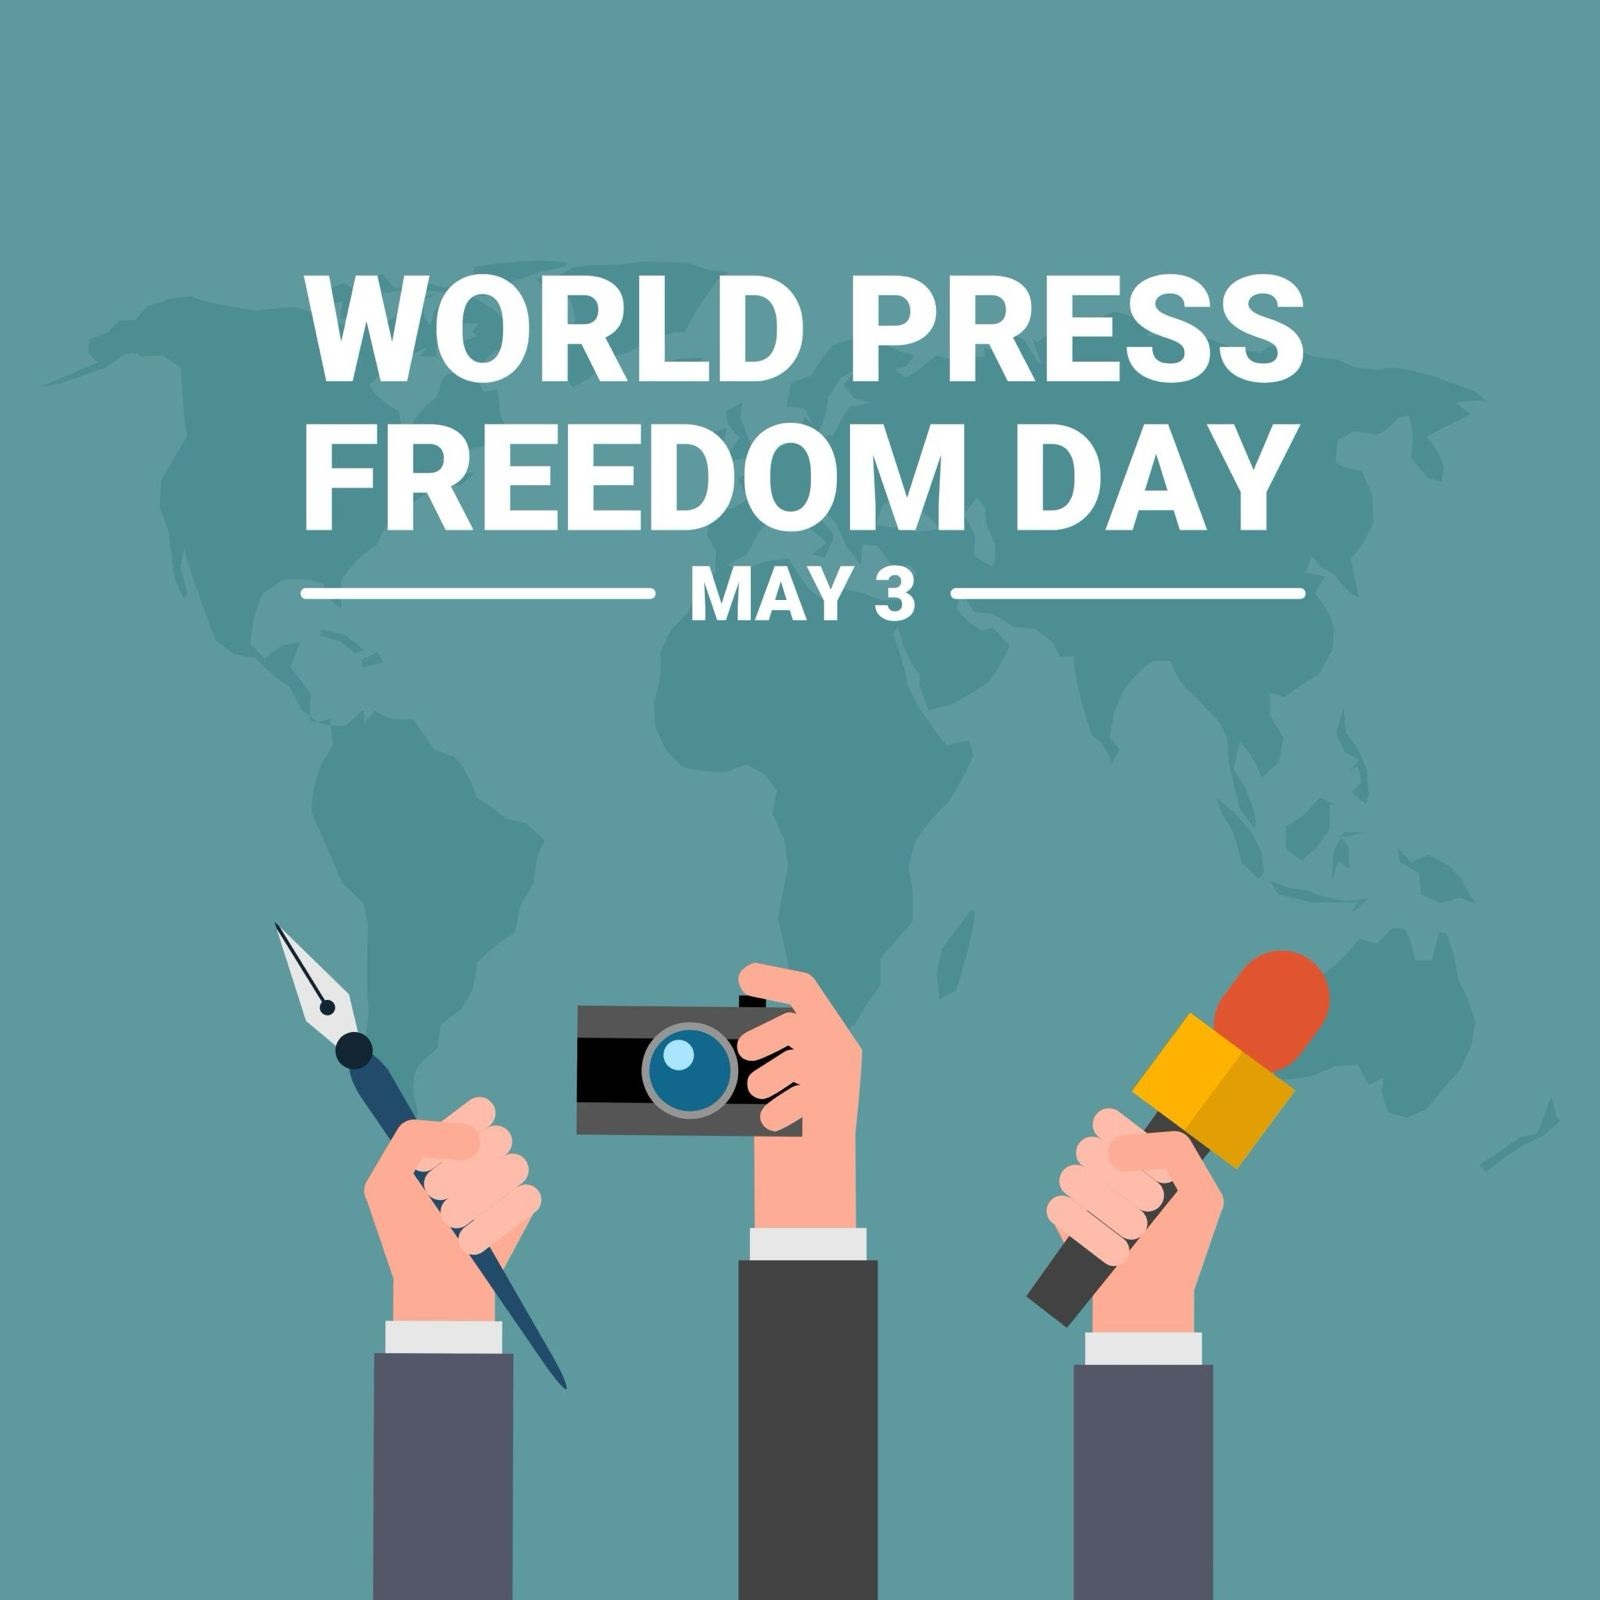 World Pres Freedom Day: Is the press really free in the Drakenstein?